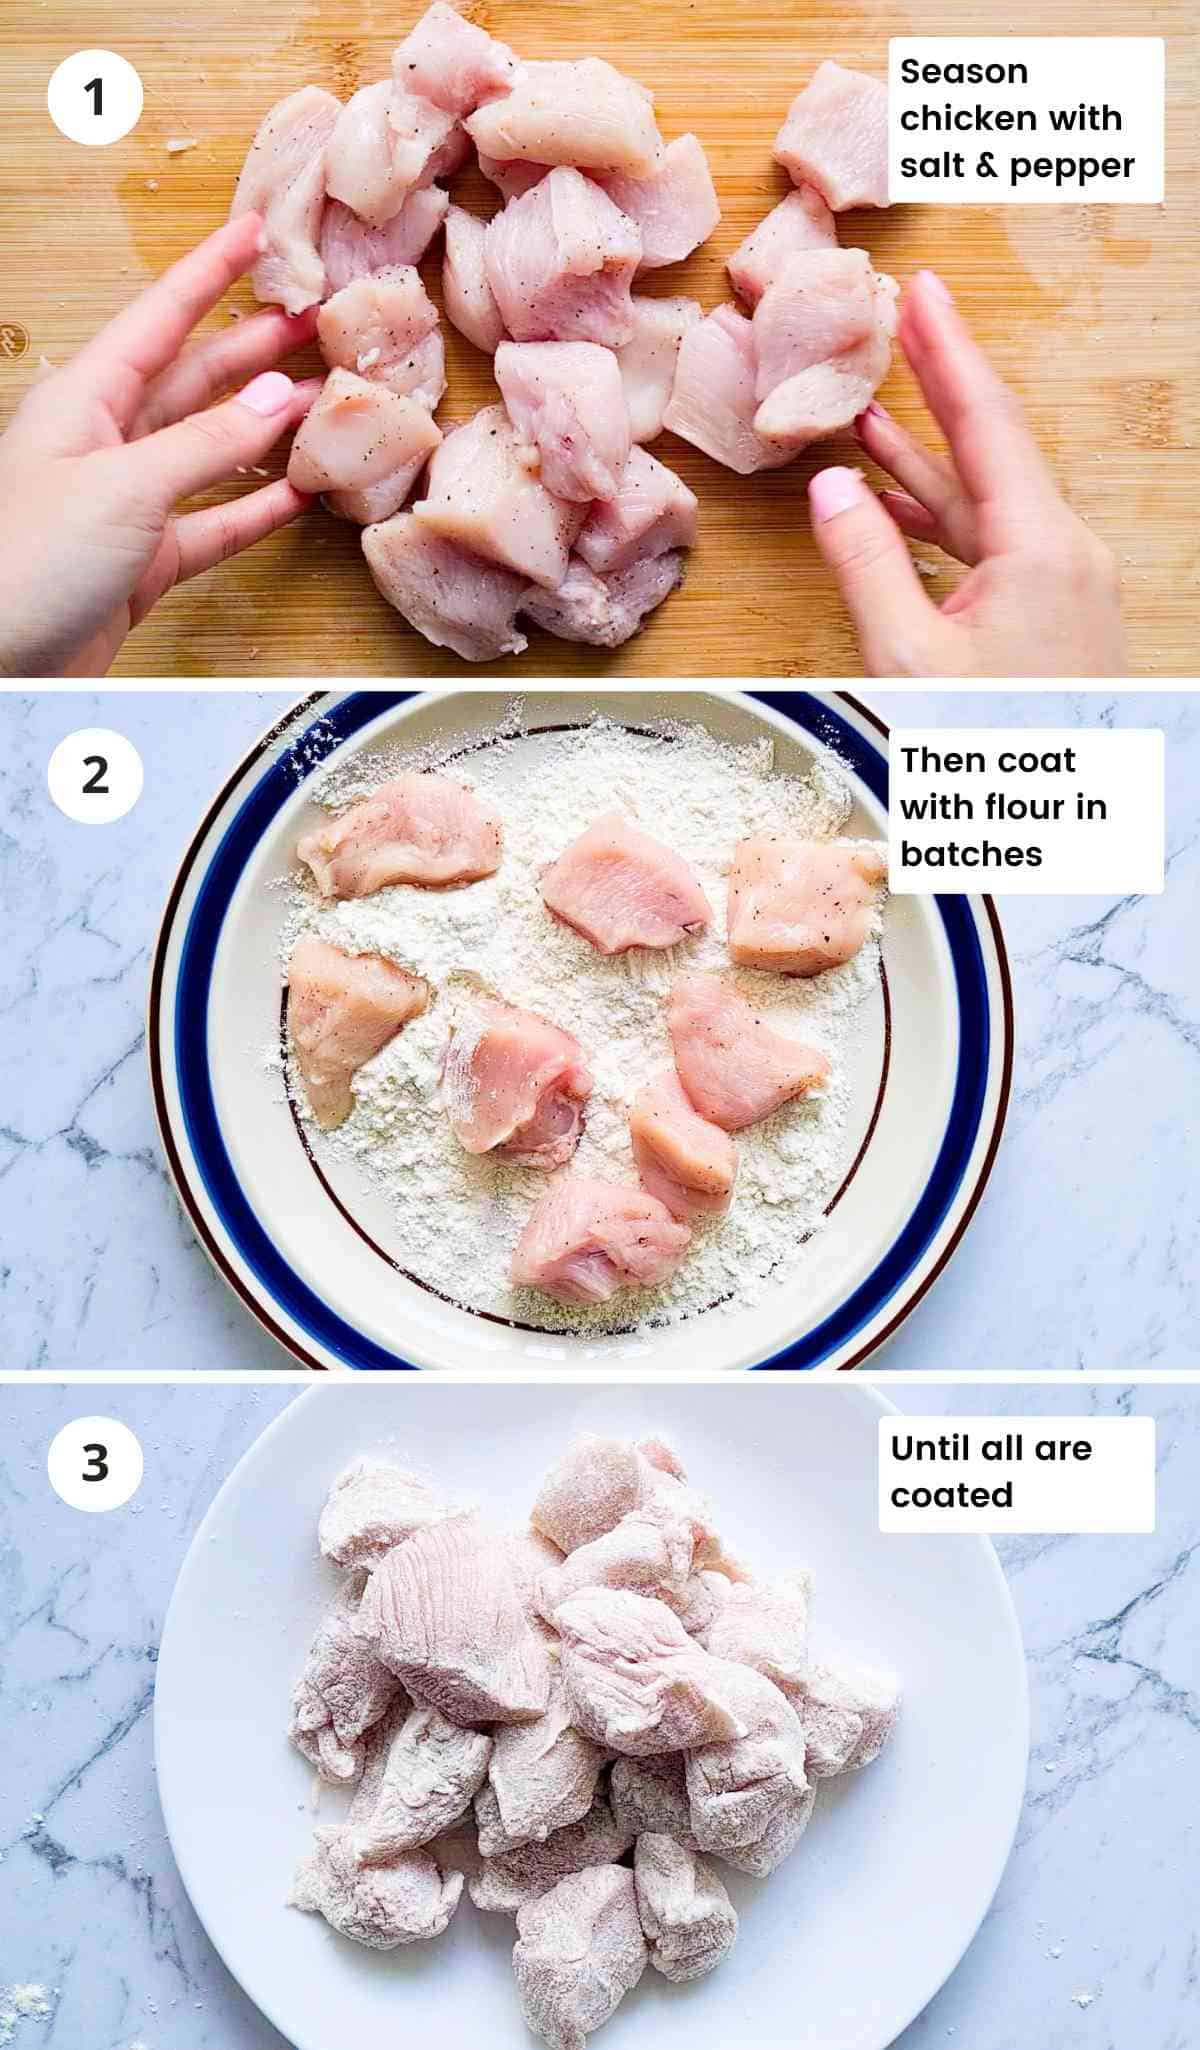 3 step how to collage of coating chicken with captions